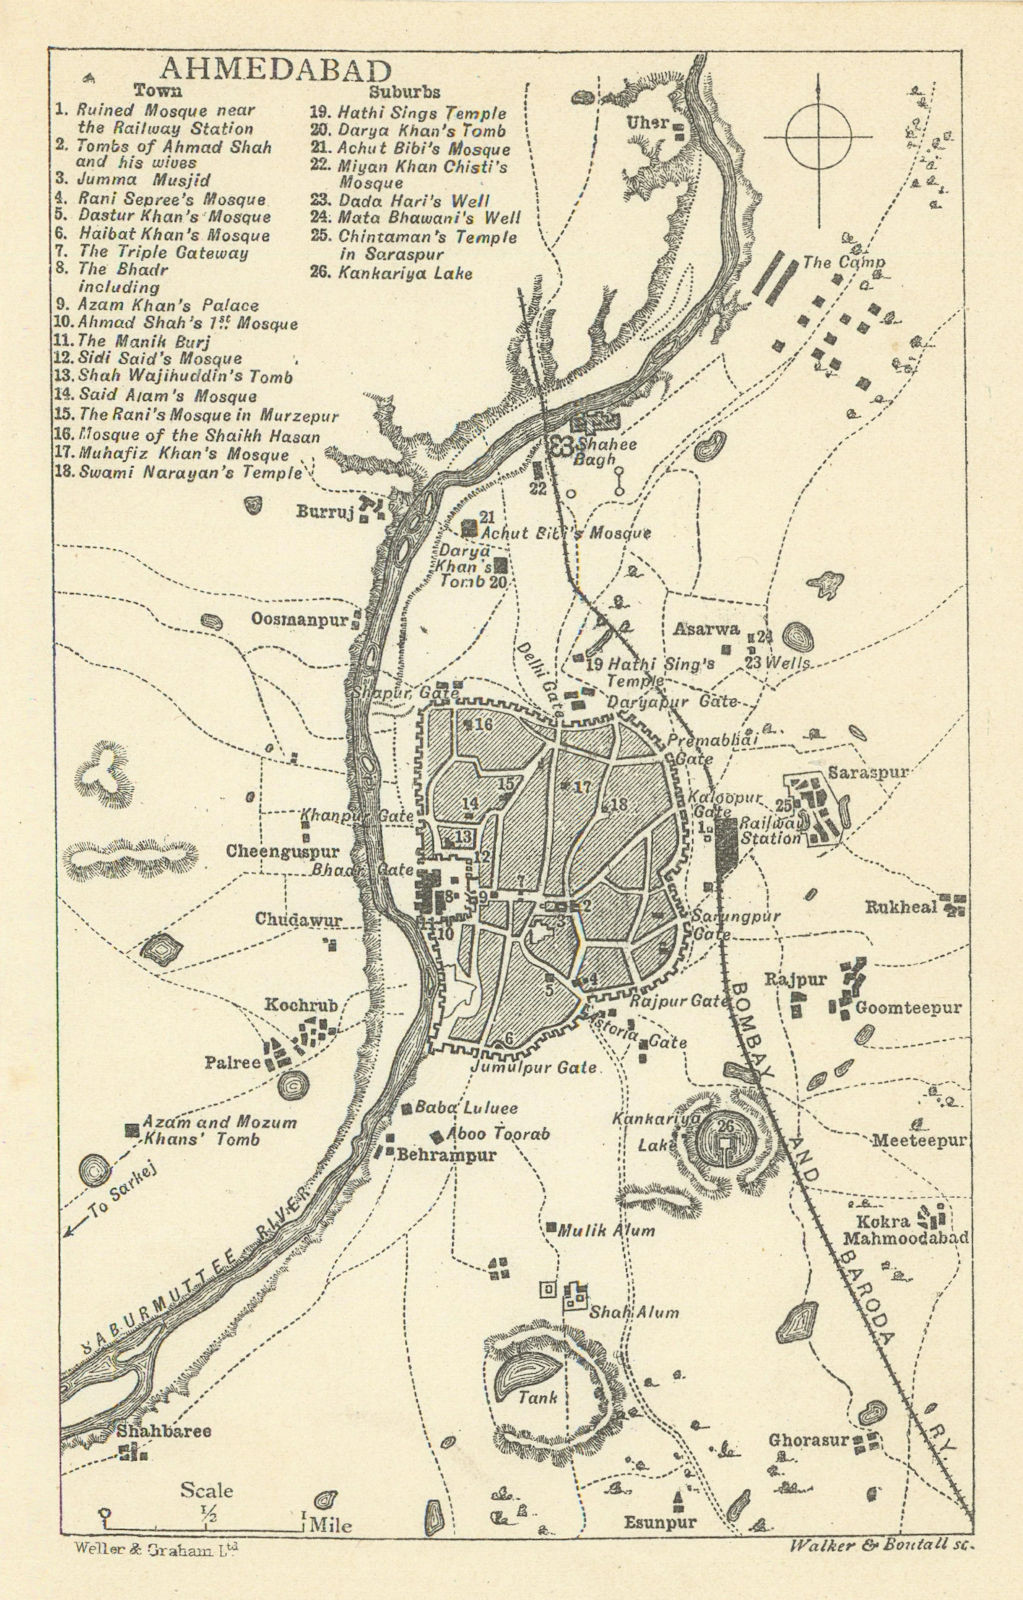 INDIA. Ahmedabad city plan. Palaces mosques temples tombs. Gujarat 1905 map